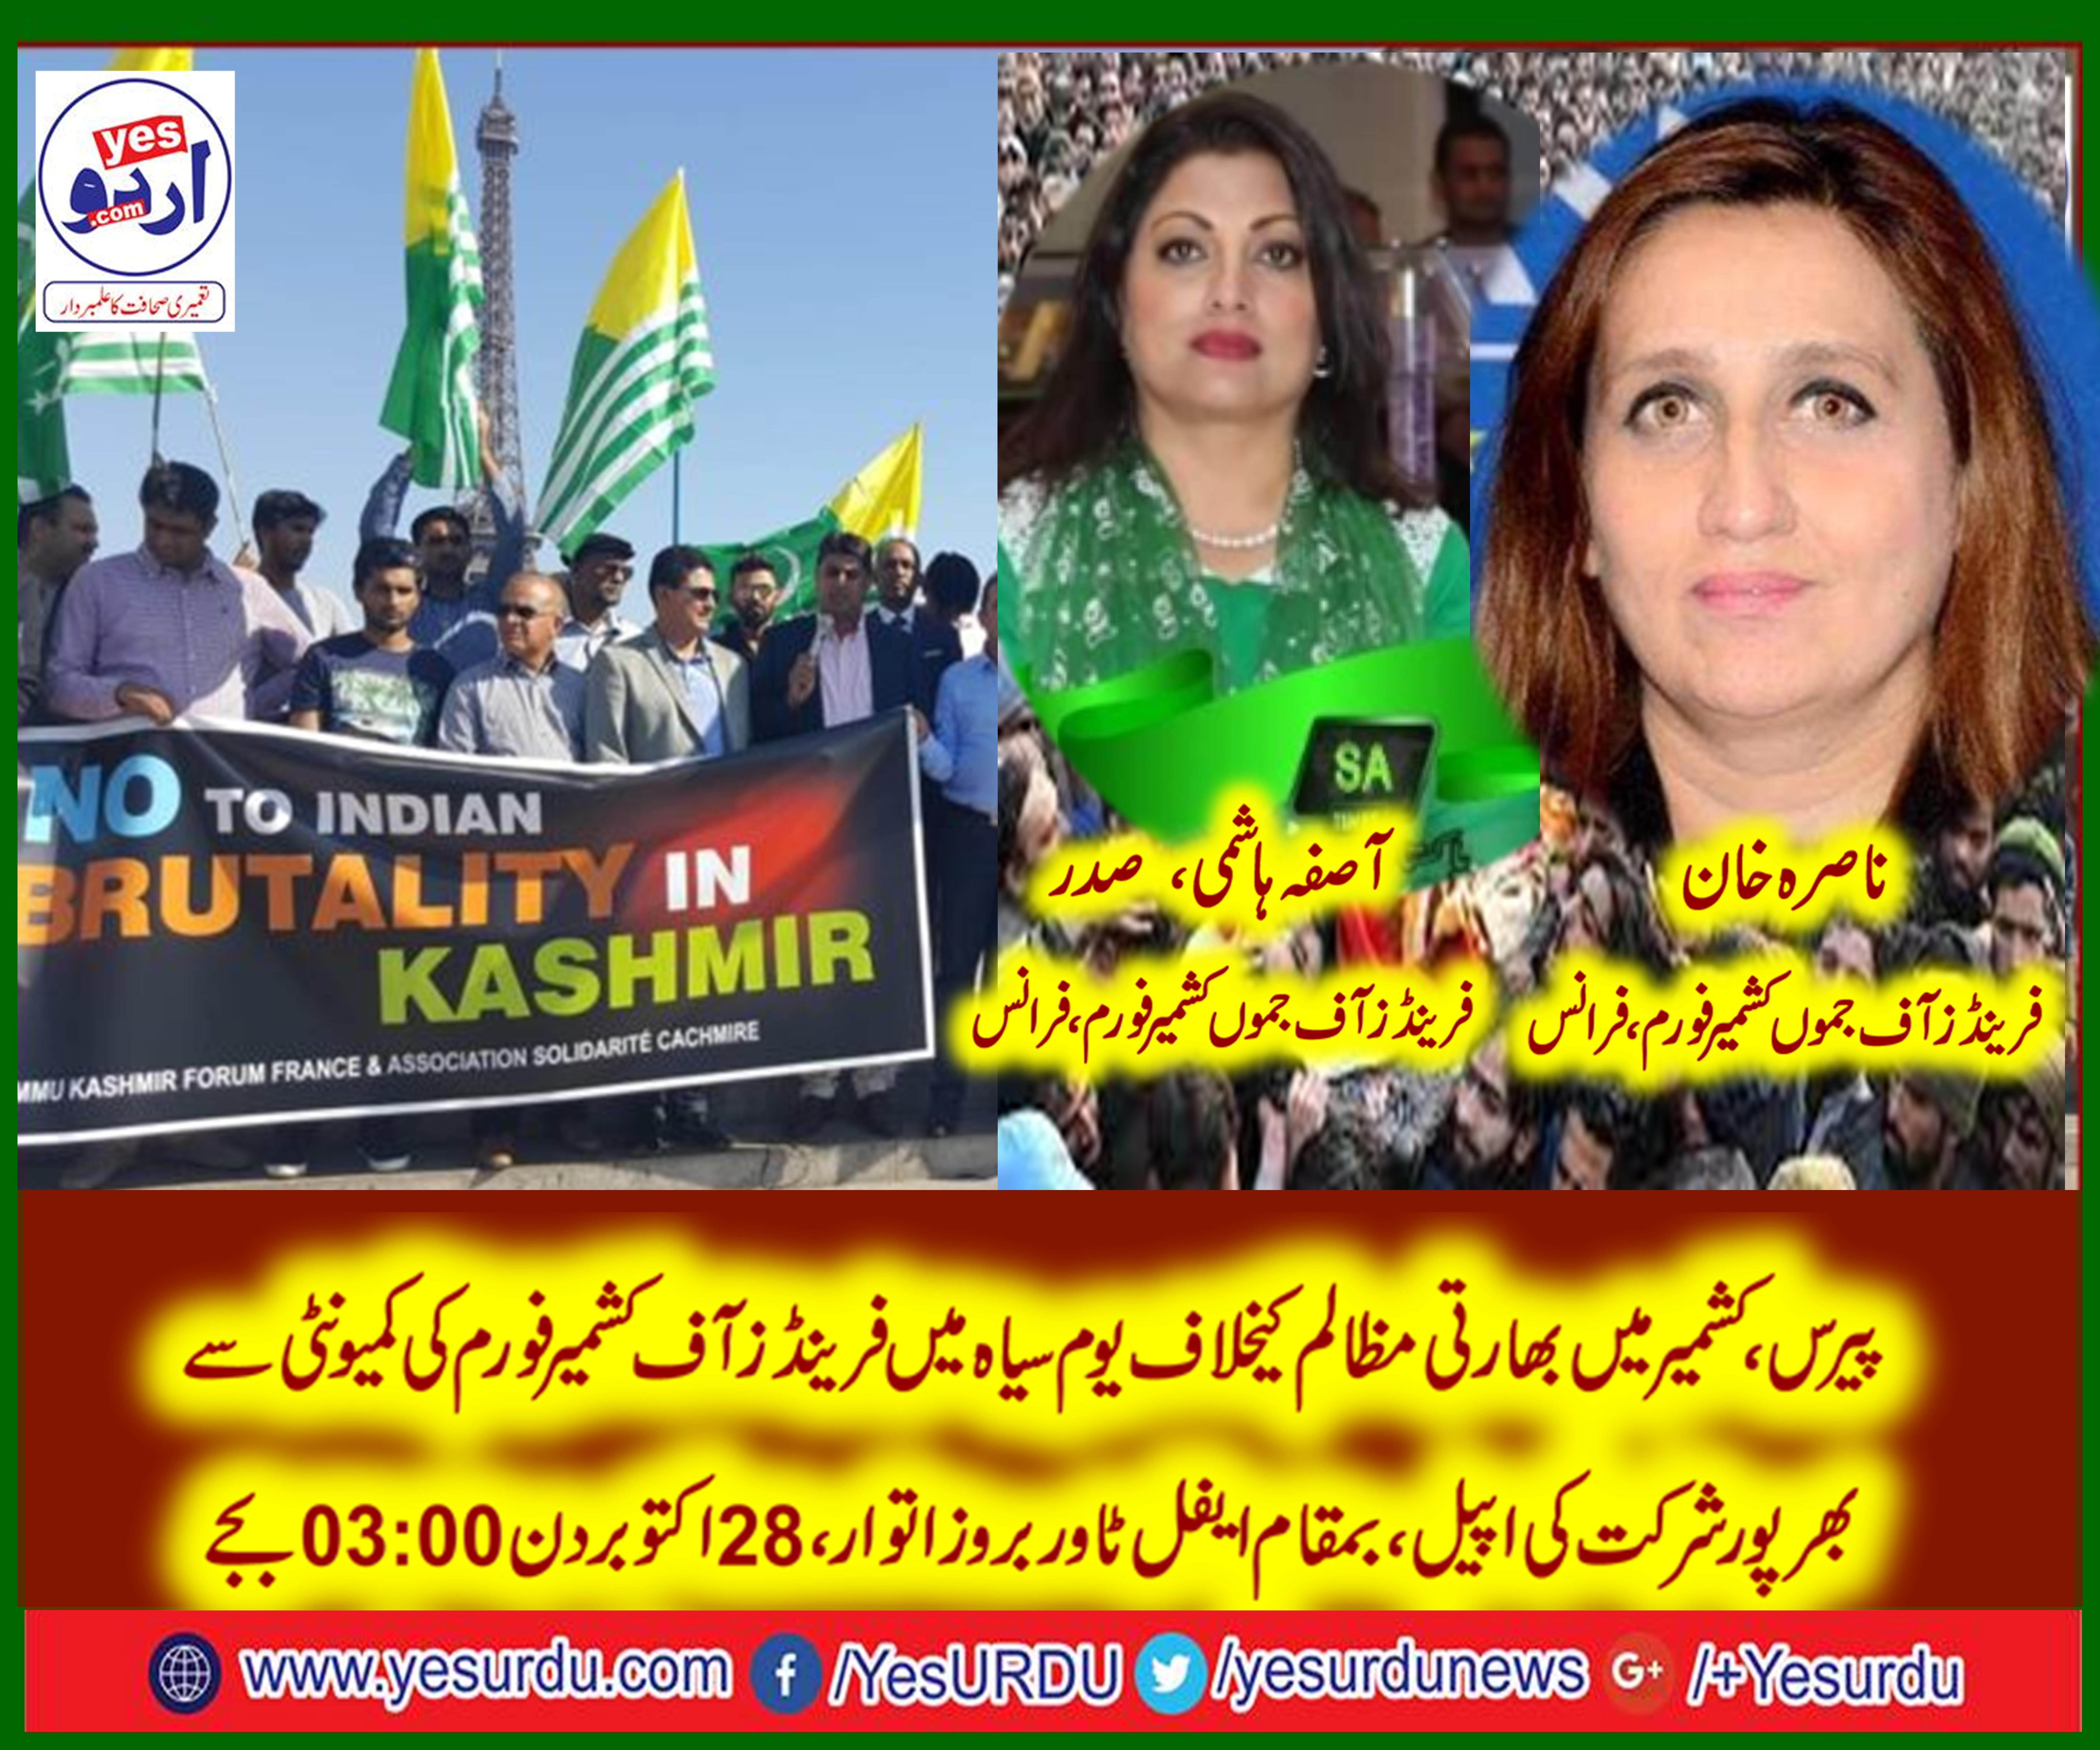 ASIFA HASHMI, PRESIDENT, NASIRA KHAN, MEMBER, FRIENDS OF, ALL, PAKISTAN, JAMMU AND, KASHMIR, FORUM, FRANCE, ANNOUNCED, THE, PROTESTS, DATE,, OF, 28, OCTOBER, AT, EIFFEL, TOWER, FRANCE, IN, FAVOR, OF, KASHMIRI, PEOPLE